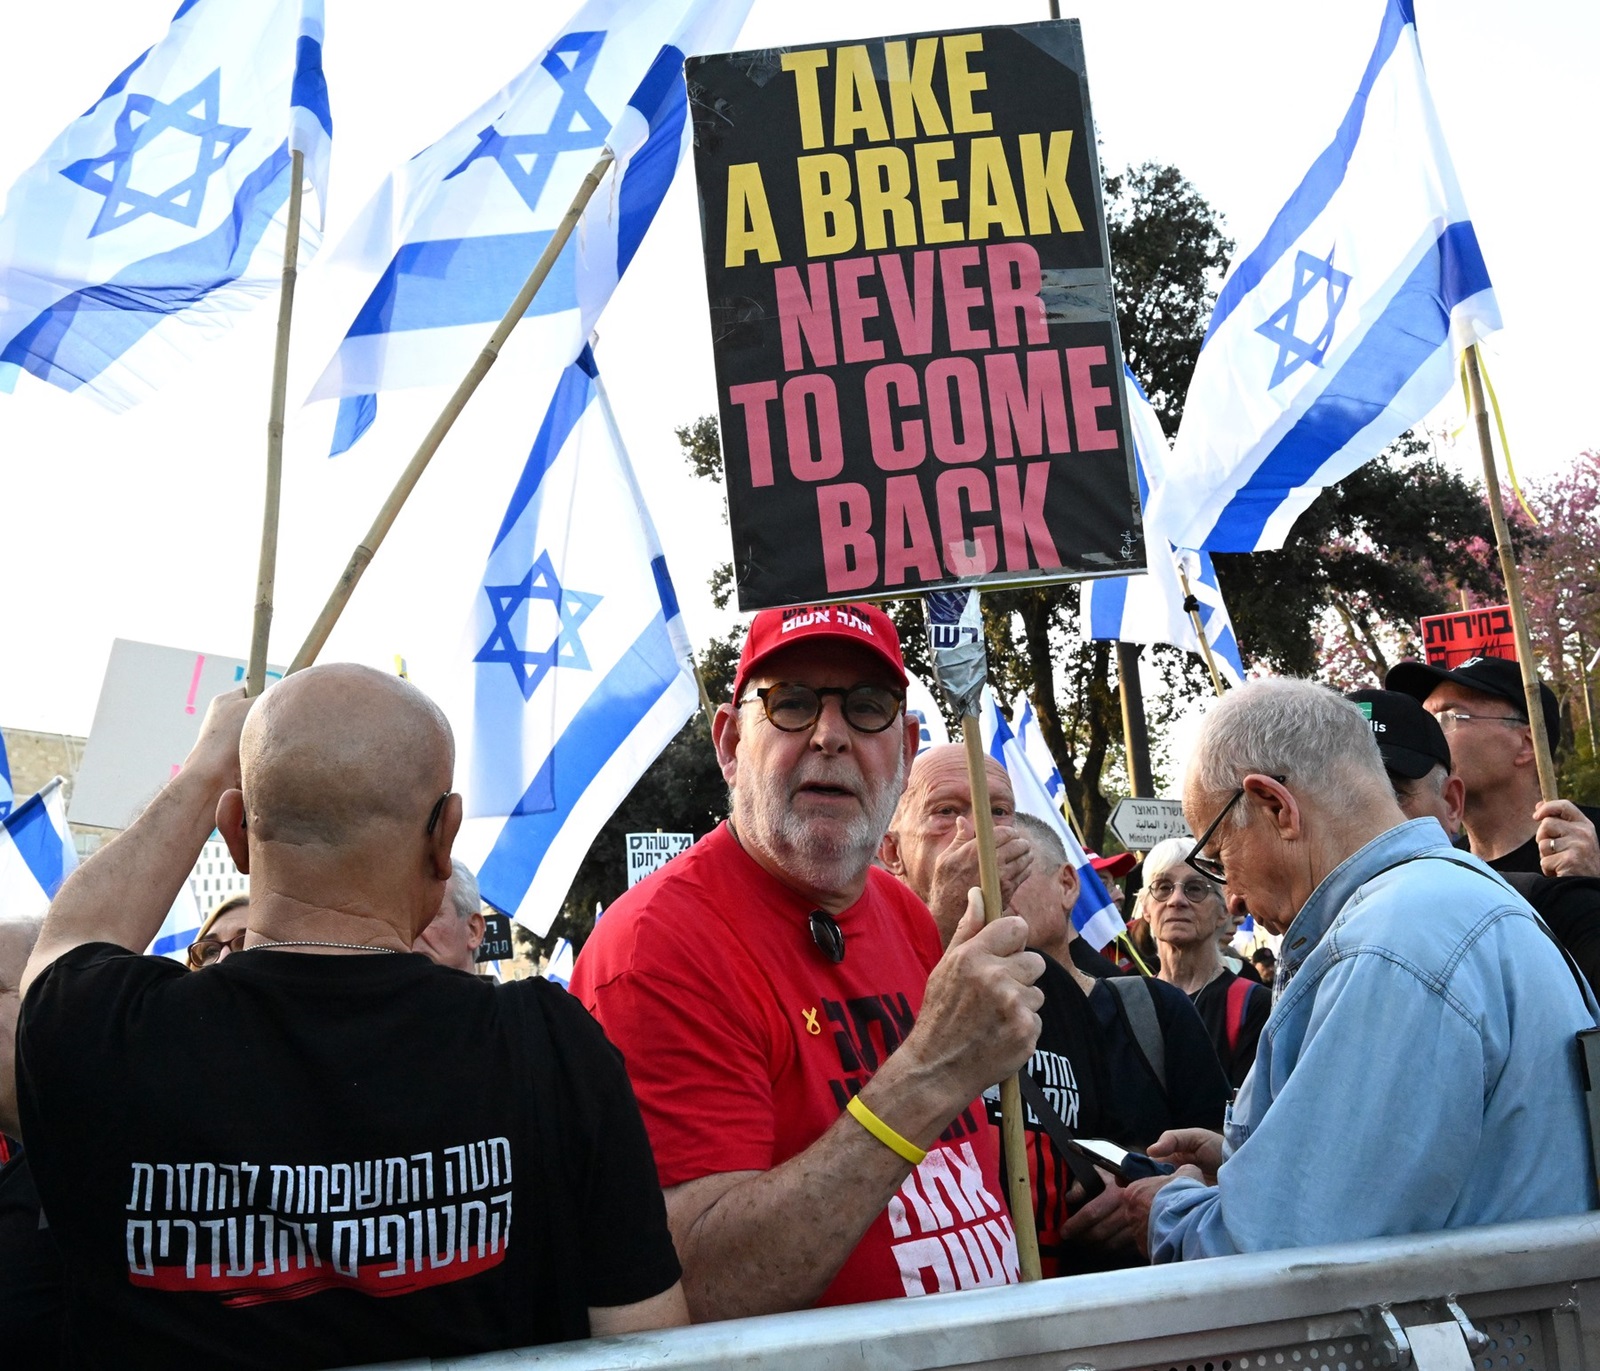 Tens of thousands of Israeli protesters attend a demonstration outside the Knesset, the Parliament, calling for Prime Minister Benjamin Netanyahu to resign, early elections, the release of hostages and the cancellation of the Knesset recess on Sunday, March 31, 2024. Photo by / UPI,Image: 861432123, License: Rights-managed, Restrictions: , Model Release: no, Credit line: DEBBIE HILL / UPI / Profimedia